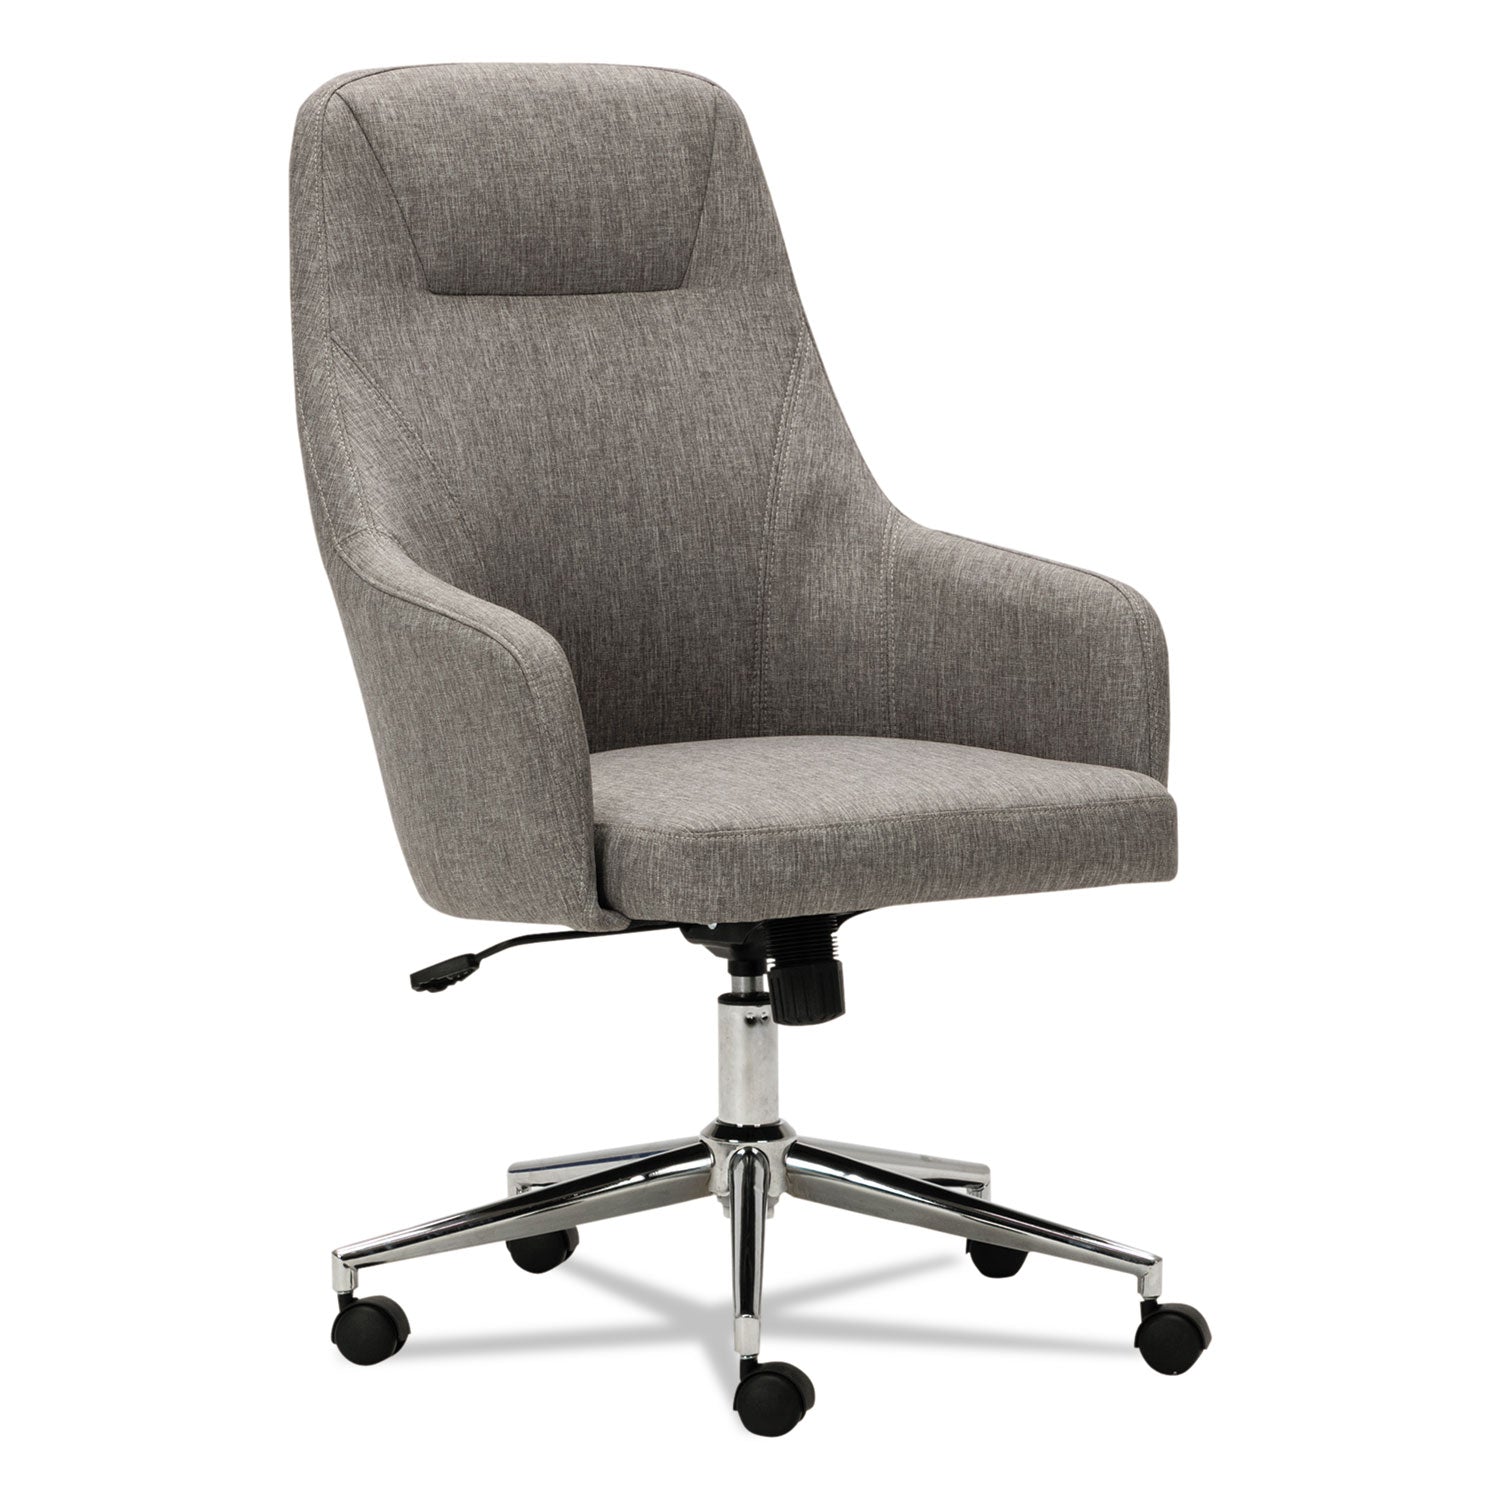 alera-captain-series-high-back-chair-supports-up-to-275-lb-171-to-201-seat-height-gray-tweed-seat-back-chrome-base_alecs4151 - 1